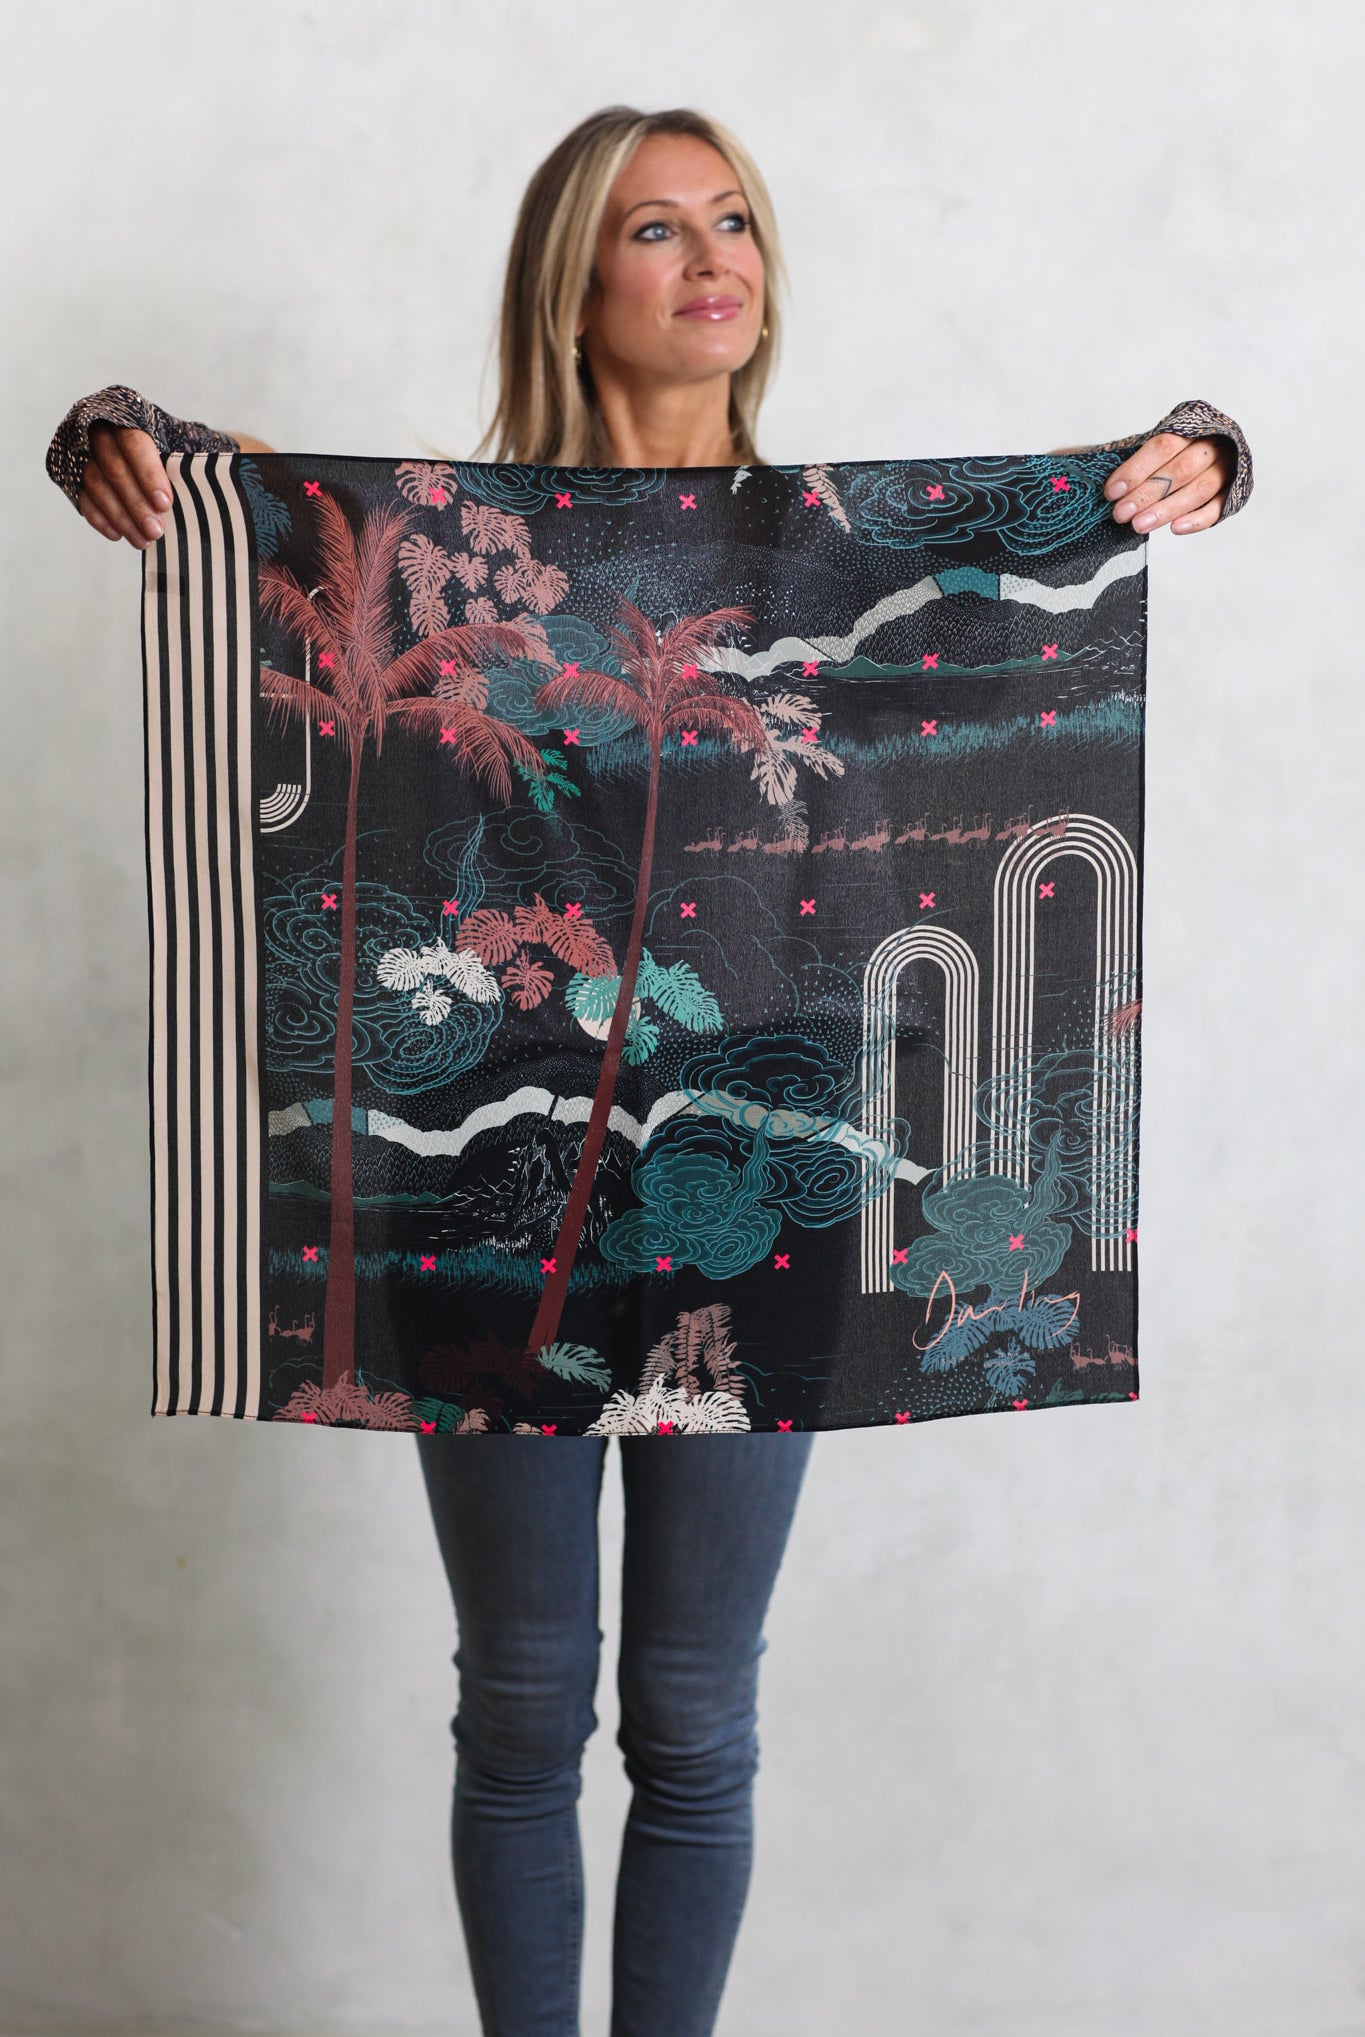 A woman holding a silk scarf with a tropical design in blacks, greens and pinks